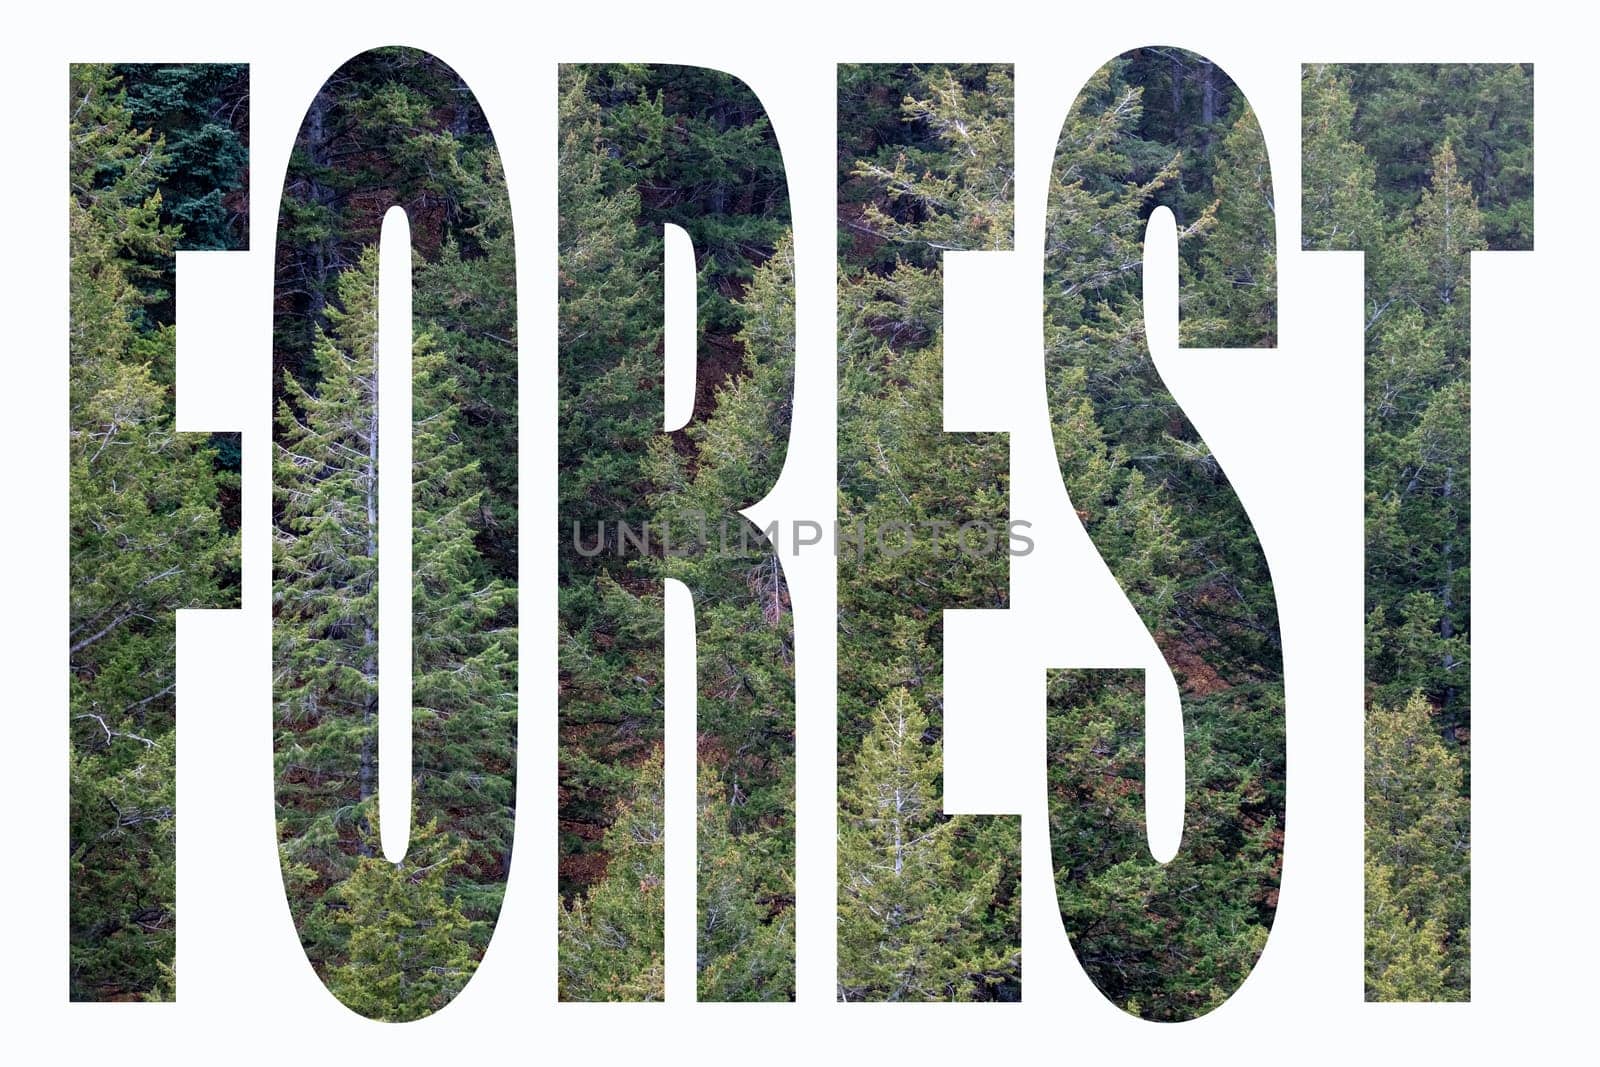 Word FOREST in white mask with image of pine tree forest viewed in text cut out. Mountain pine forest scene viewed through text box Forest by bRollGO